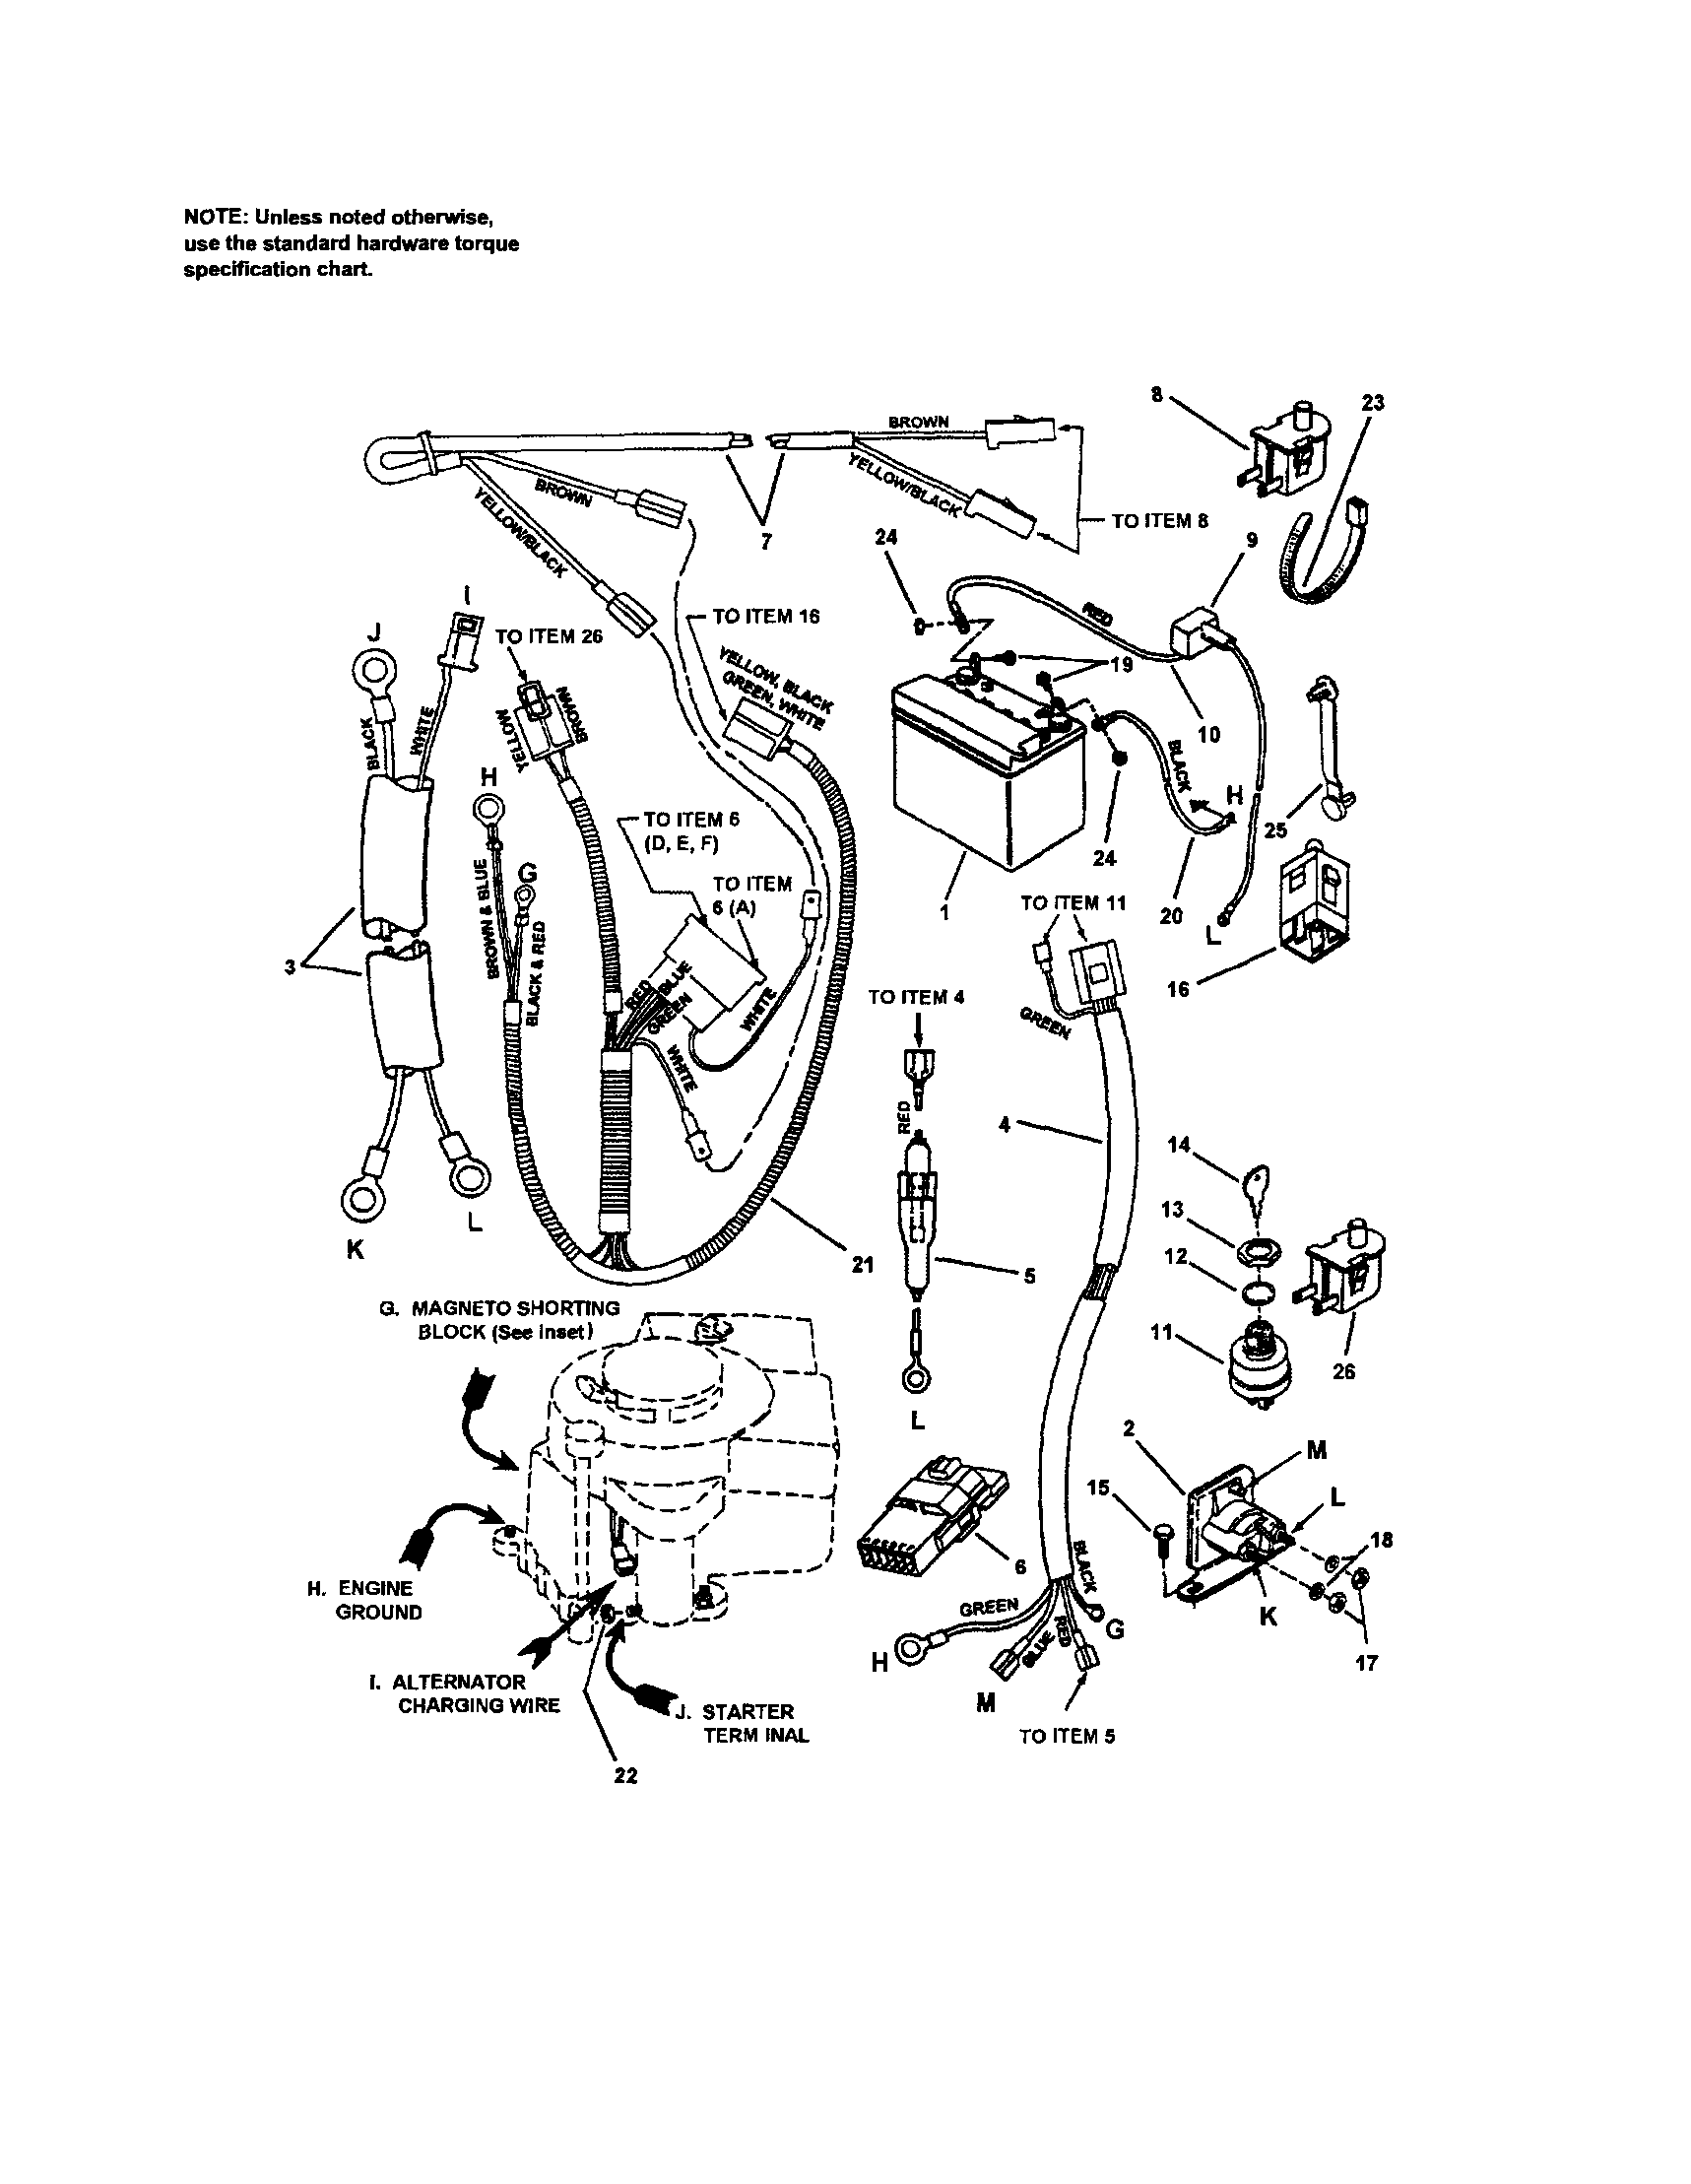 Briggs And Stratton 18 Hp Twin Wiring Diagram from c.searspartsdirect.com